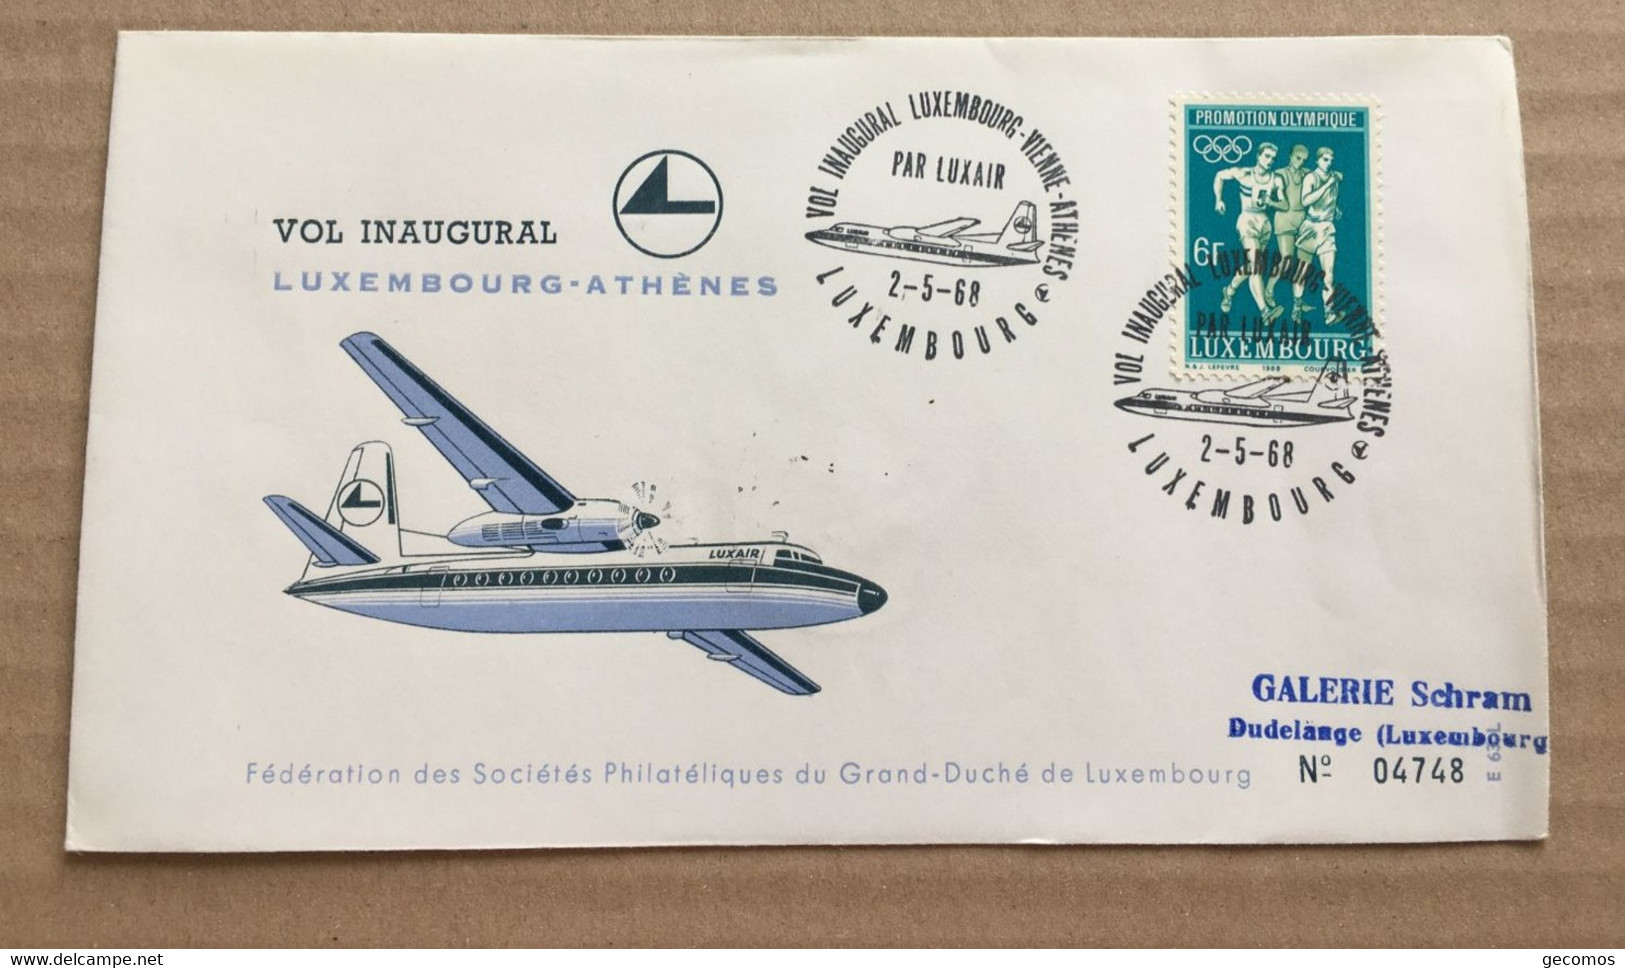 VOL INAUGURAL LUXEMBOURG-ATHENES 2-5-68 - (Avion LUXAIR) - Timbre Promotion Olympique LUXEMBOURG. - Cartas & Documentos